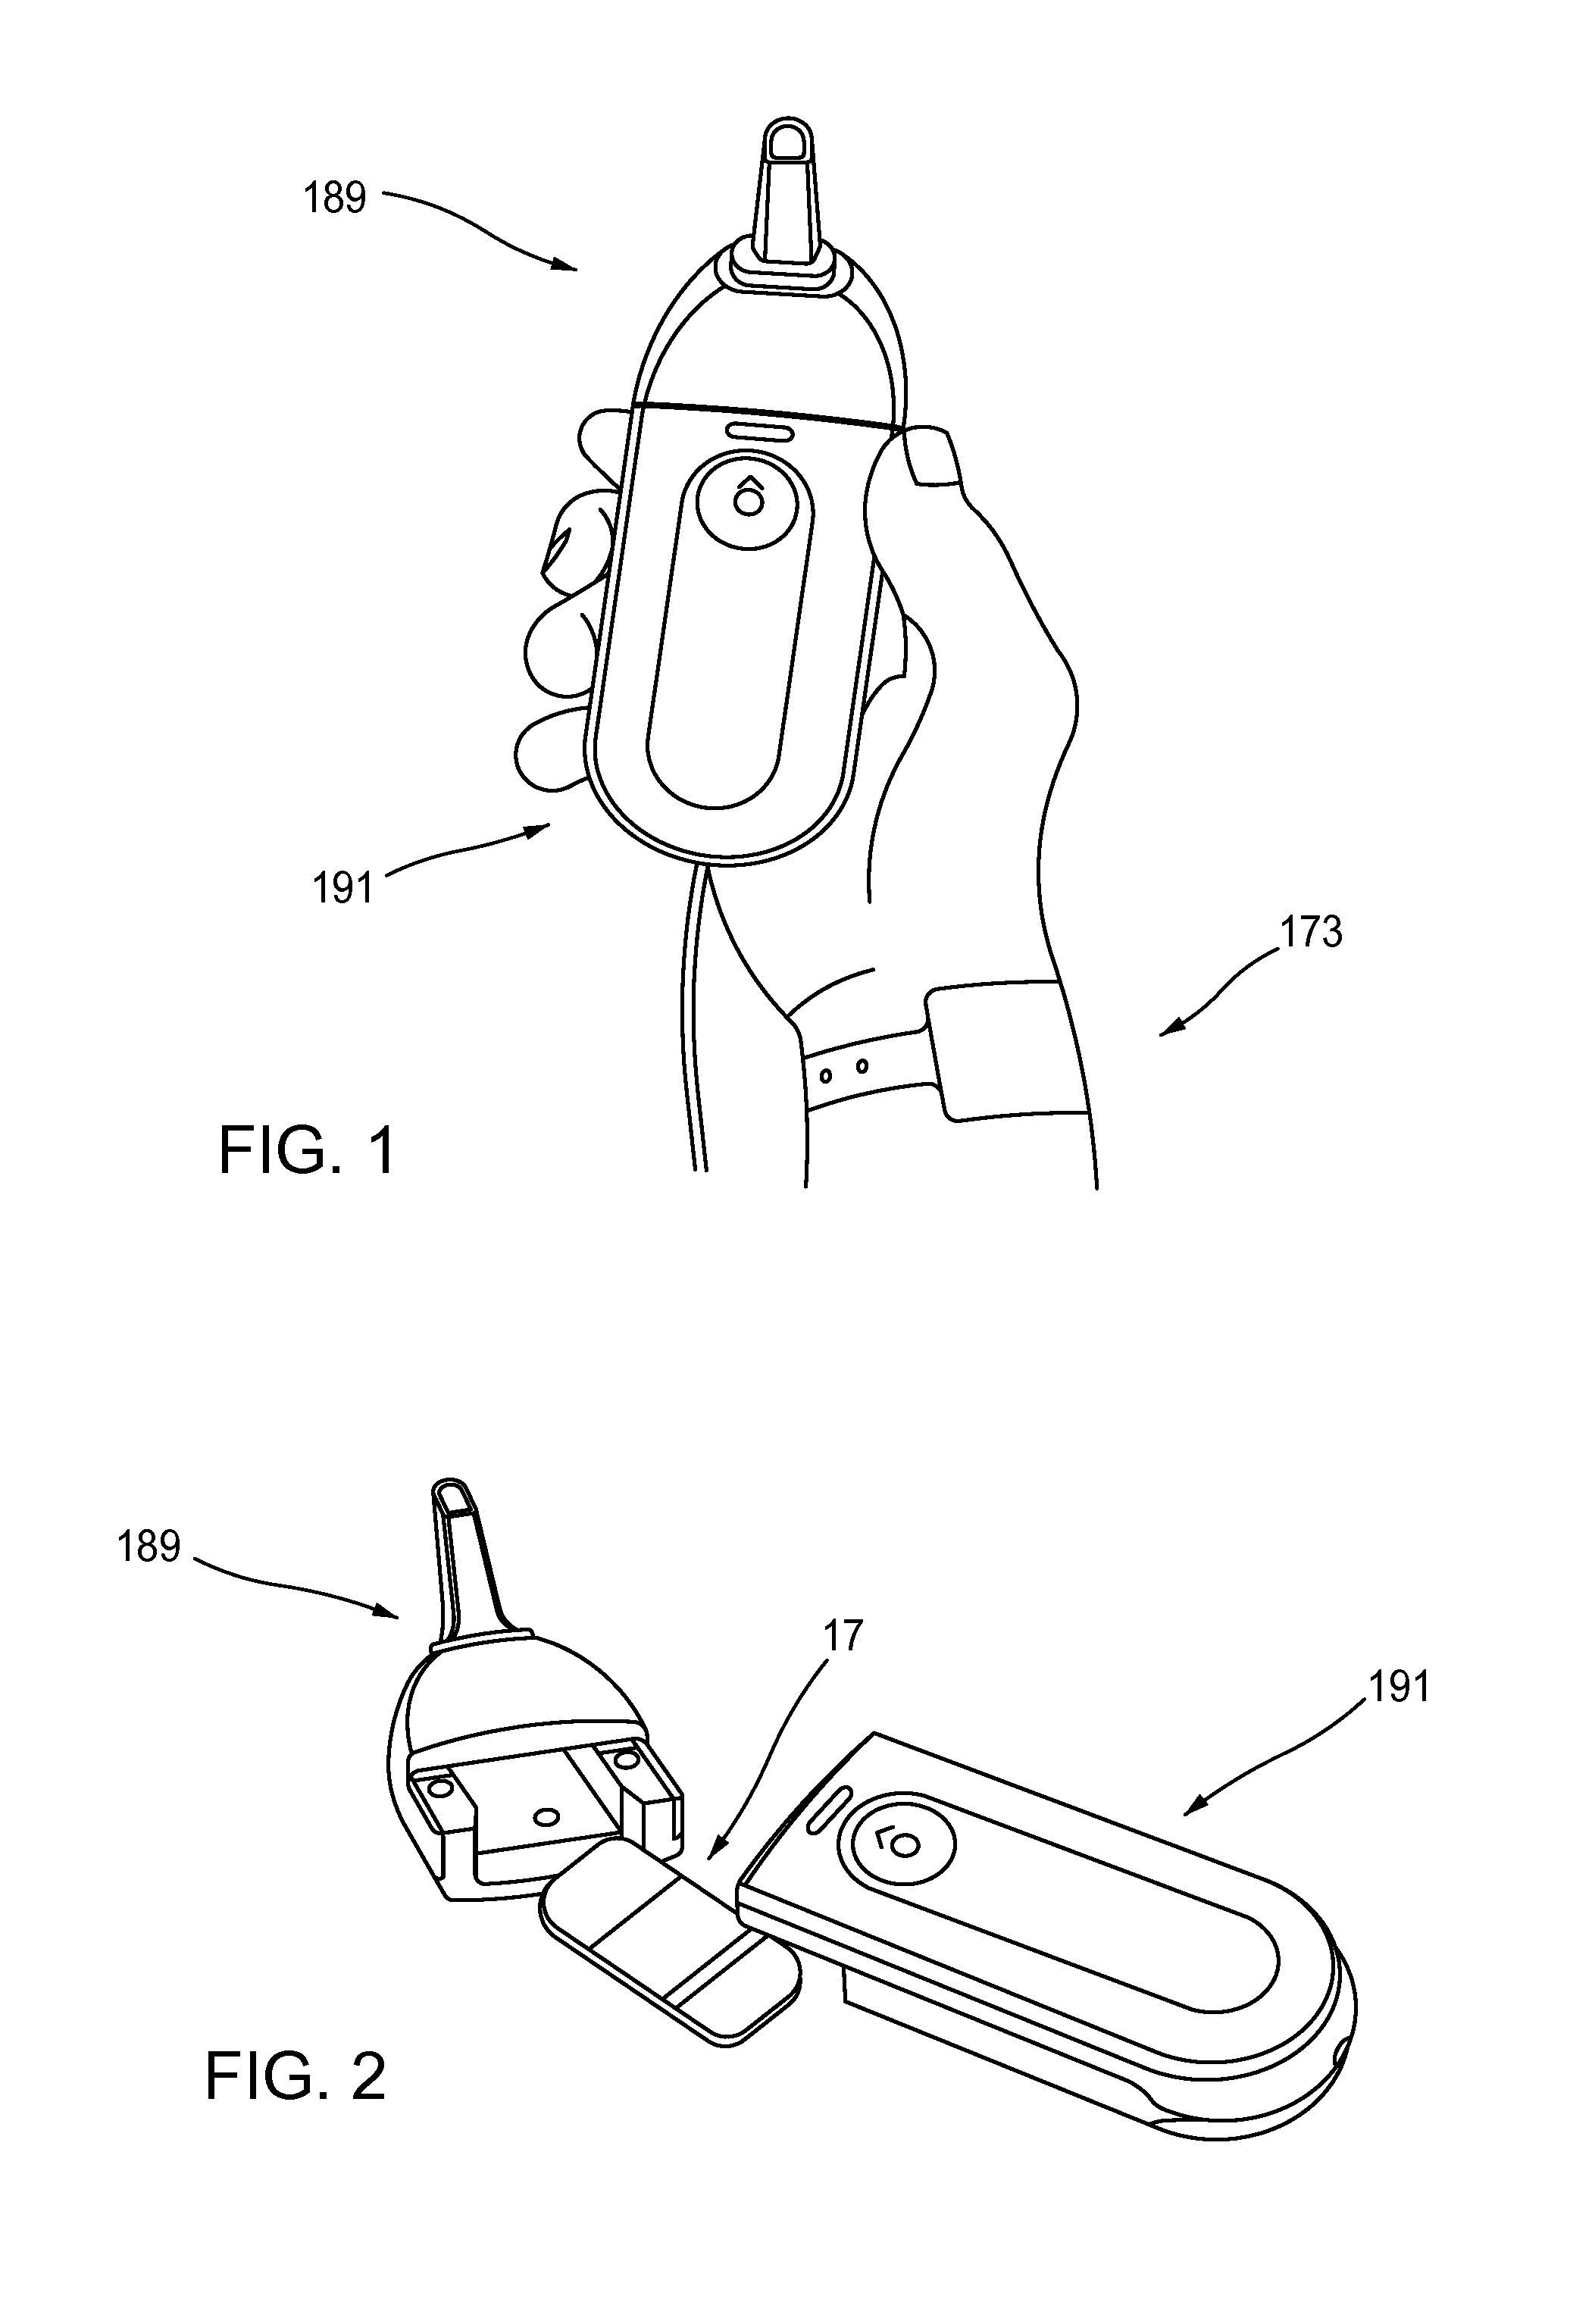 Storage and dispensing devices for administration of oral transmucosal dosage forms